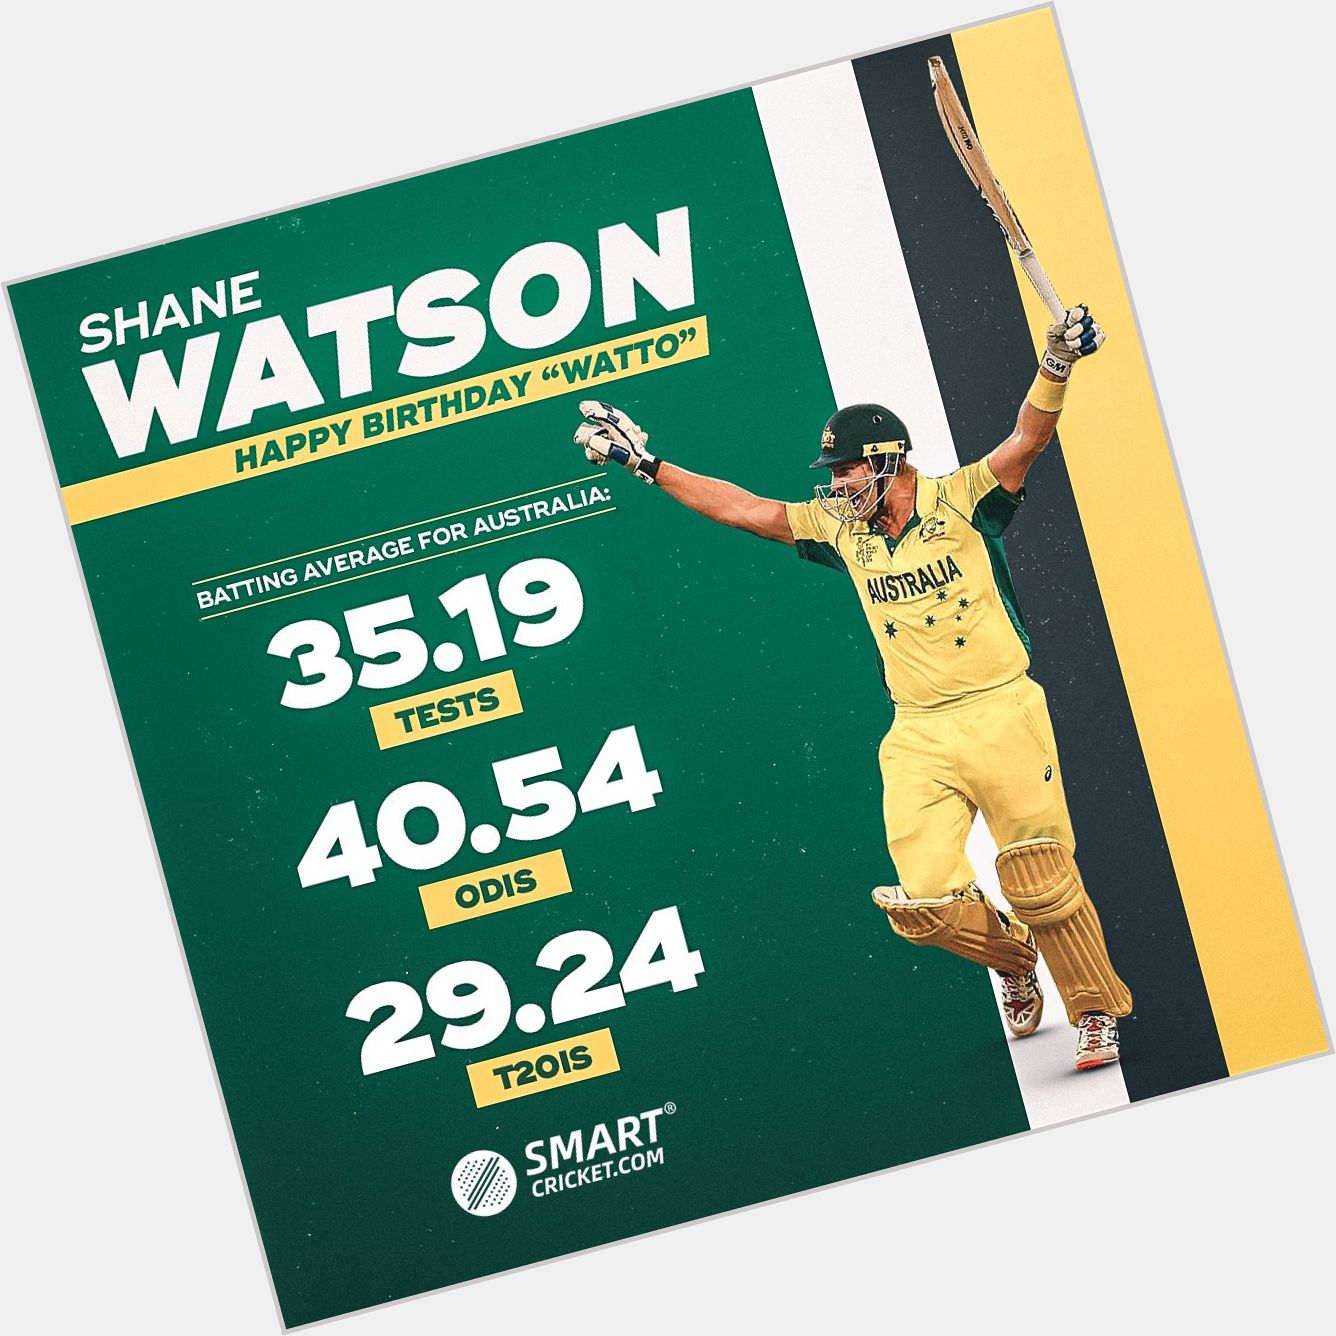 Happy birthday, Shane Watson!  An absolute legend of the modern game!  